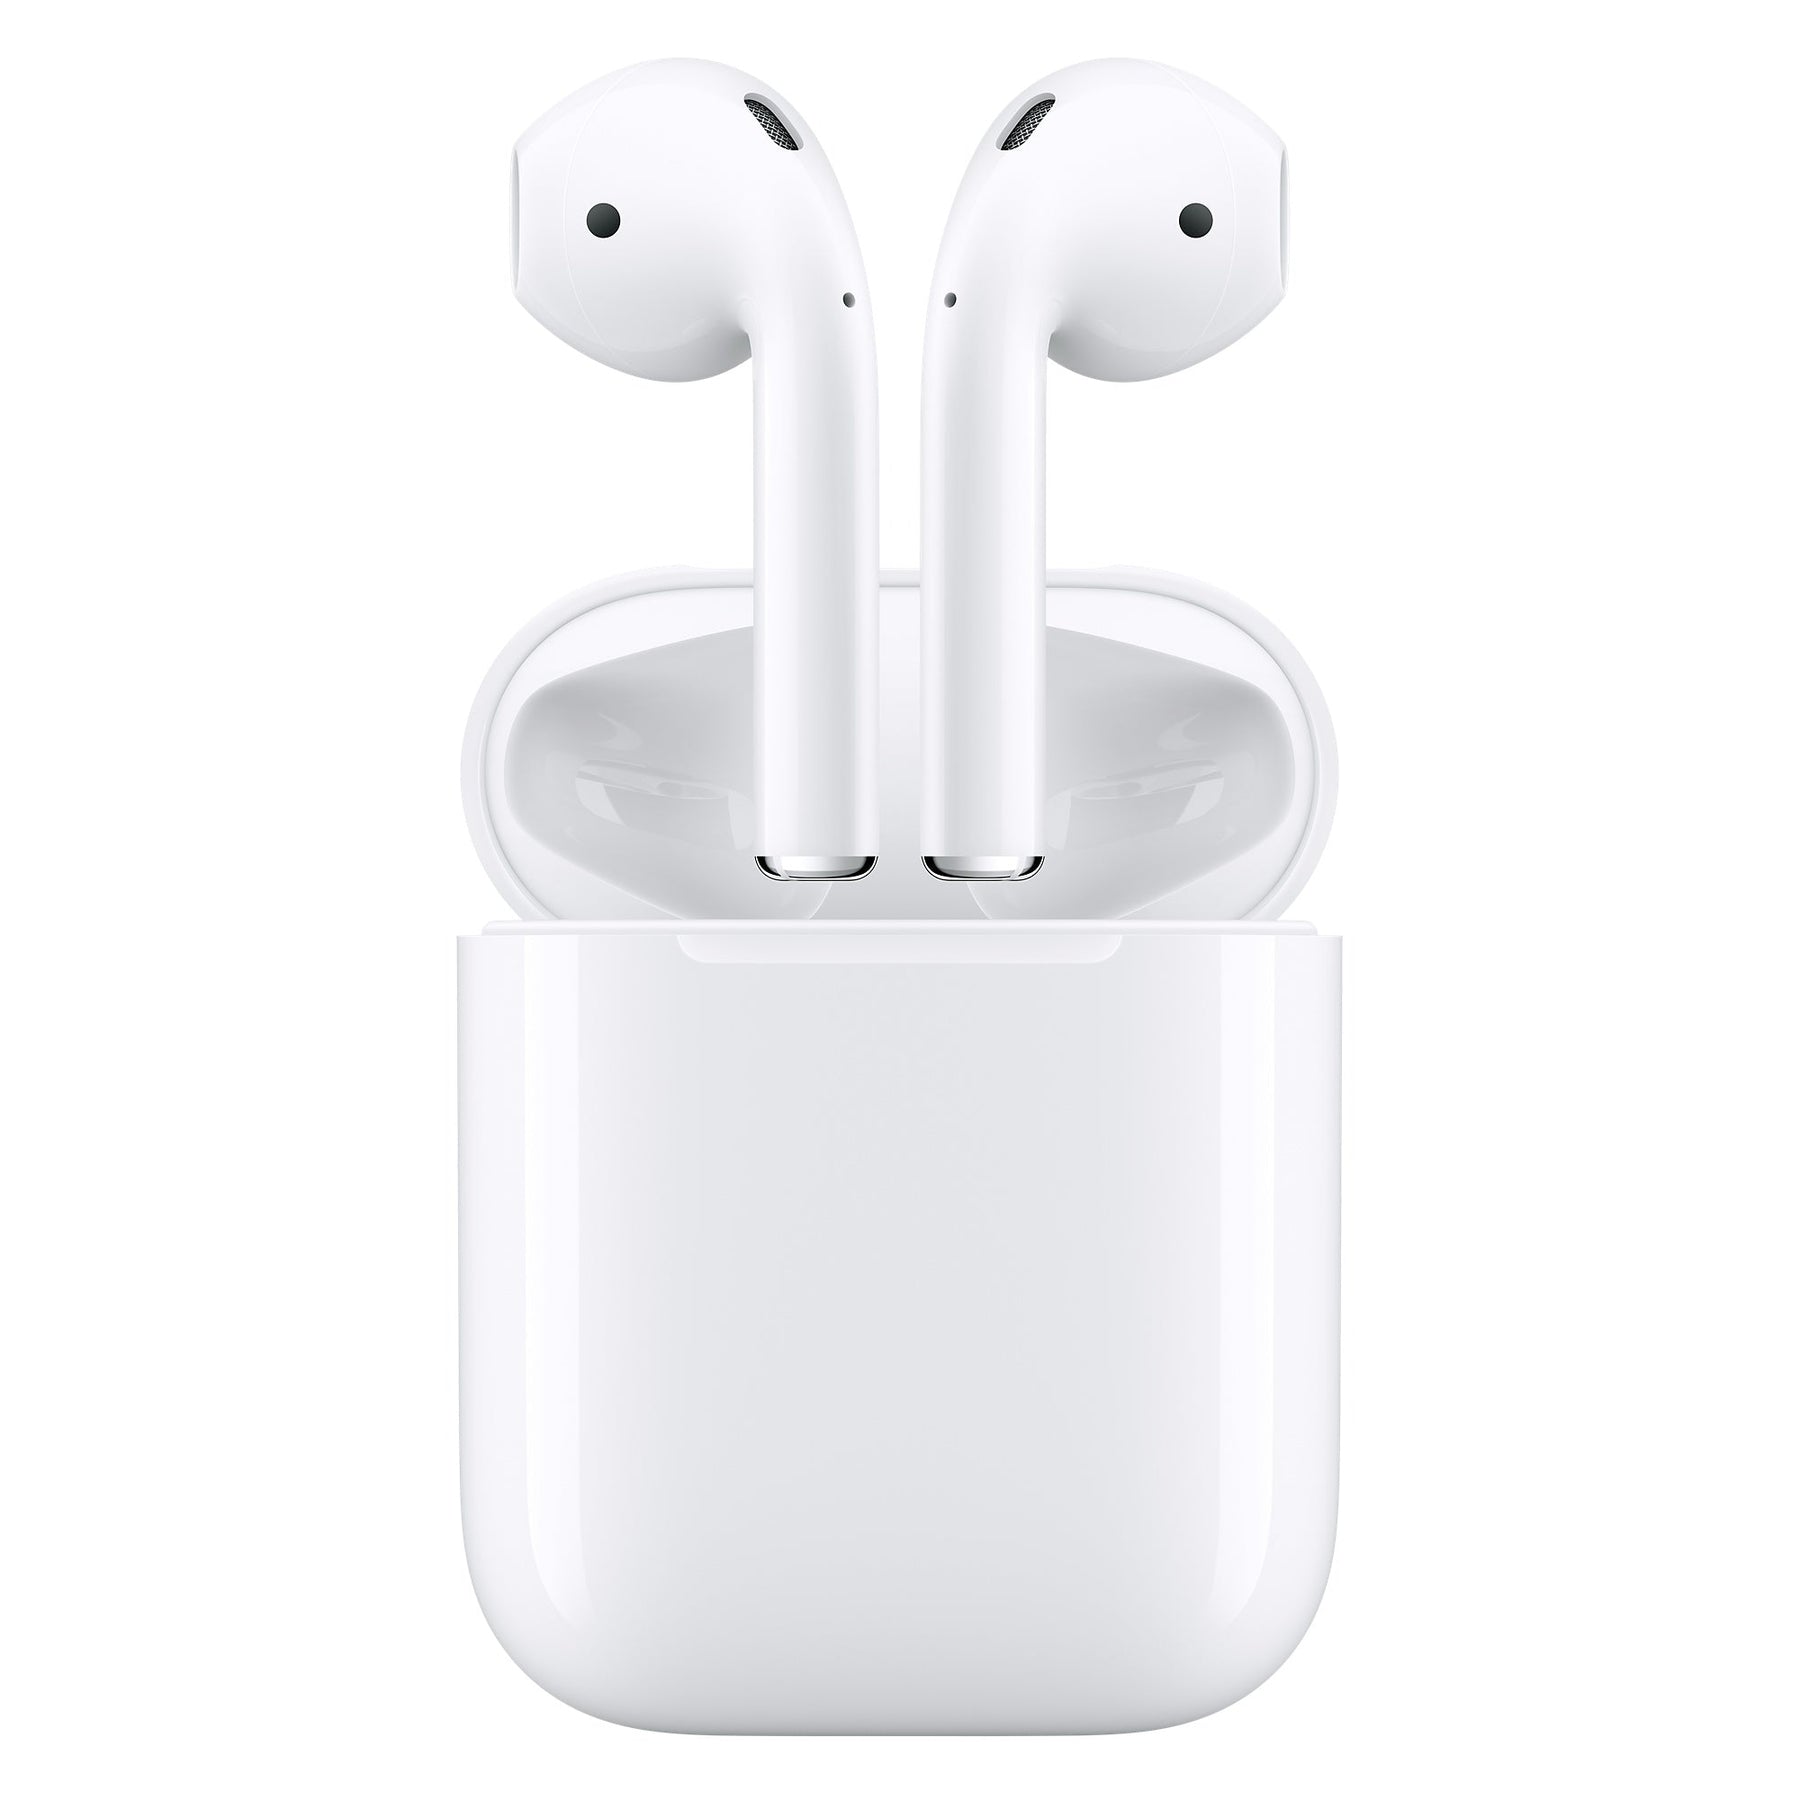 Apple AirPods (2nd Generation) with Lightning Charging Case - Good Condition